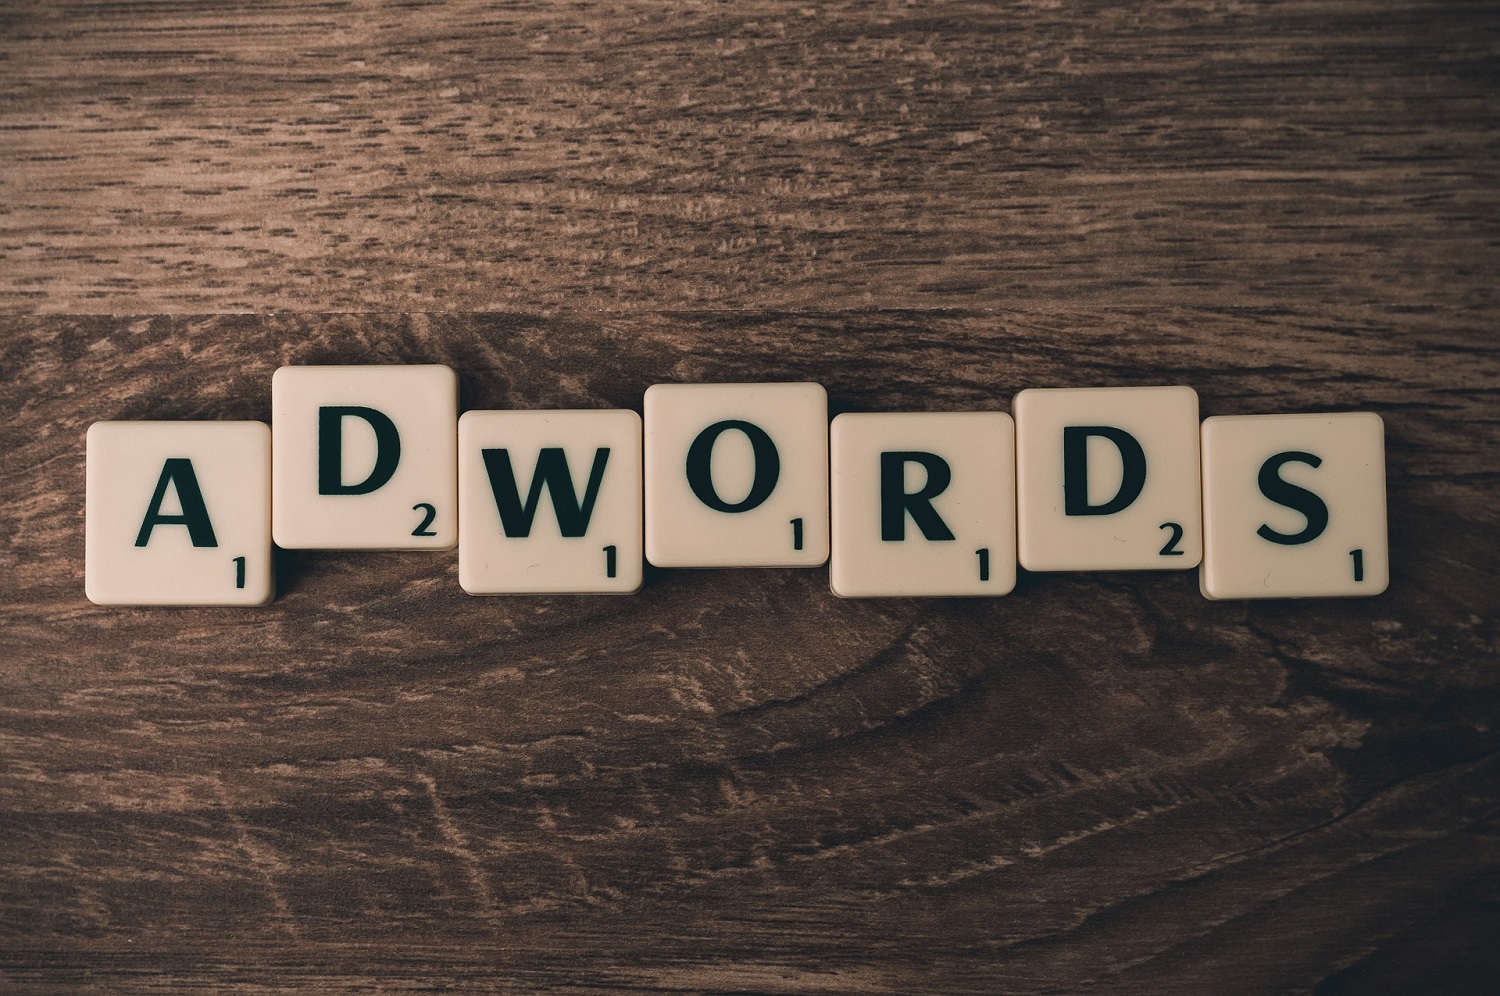 Top 6 Google AdWords mistakes made by small businesses